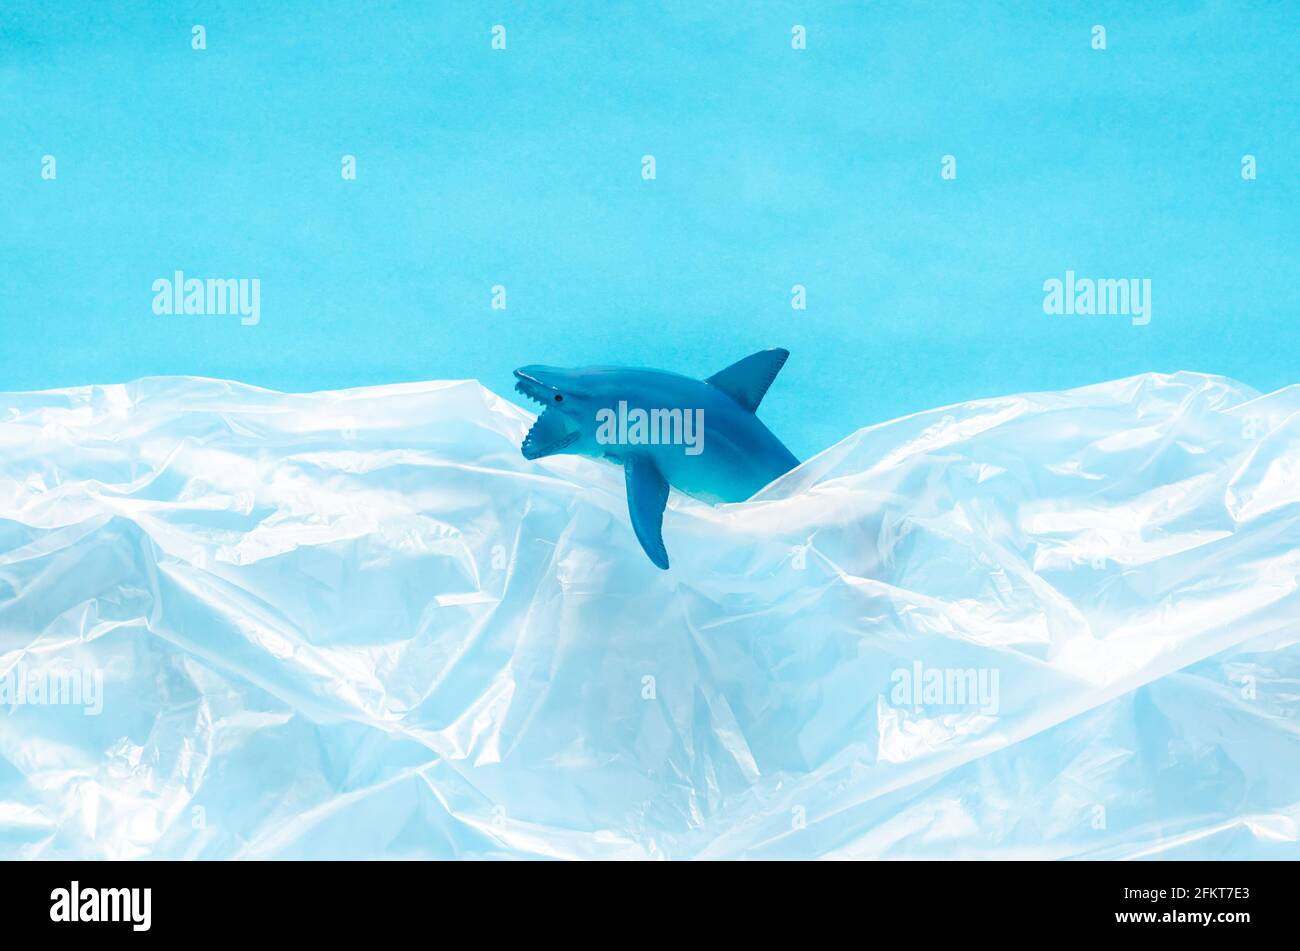 A shark toy model trapped in white plastic bag on blue background. Minimal ocean world concept. Stock Photo